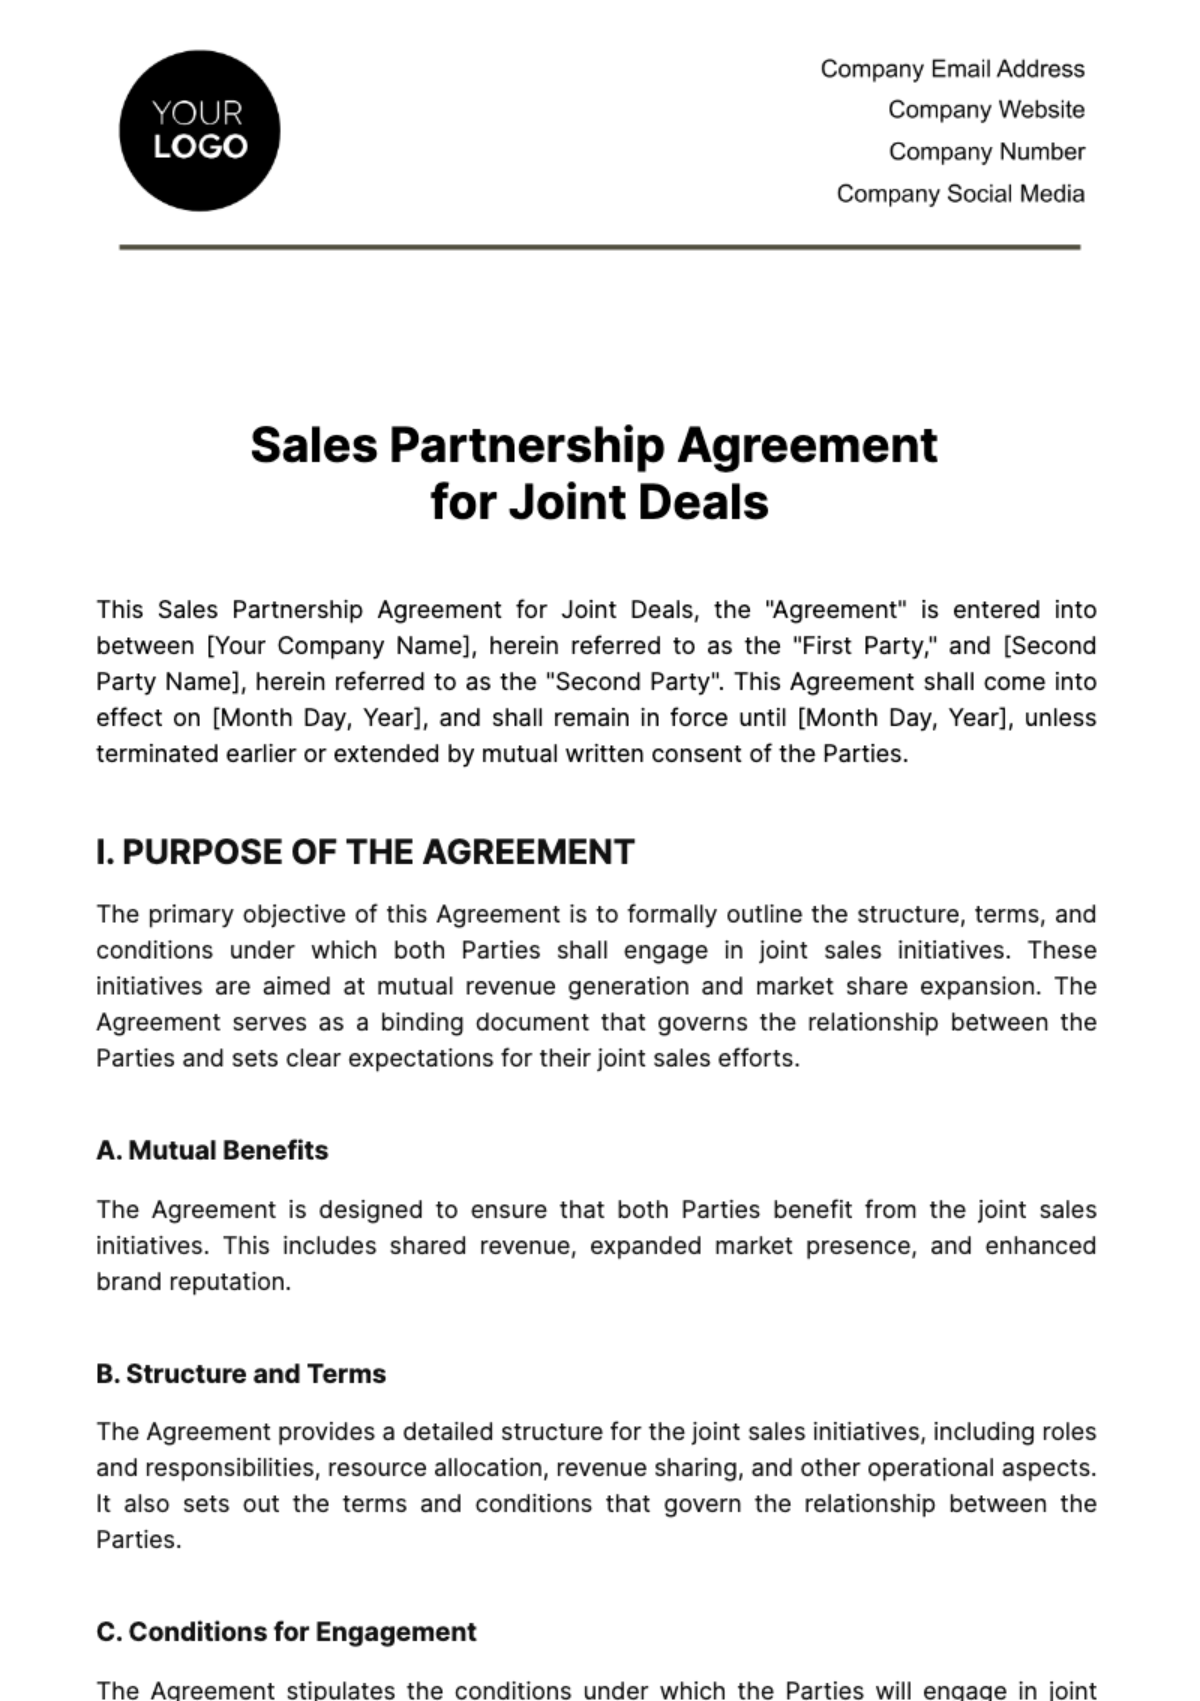 Sales Partnership Agreement for Joint Deals Template